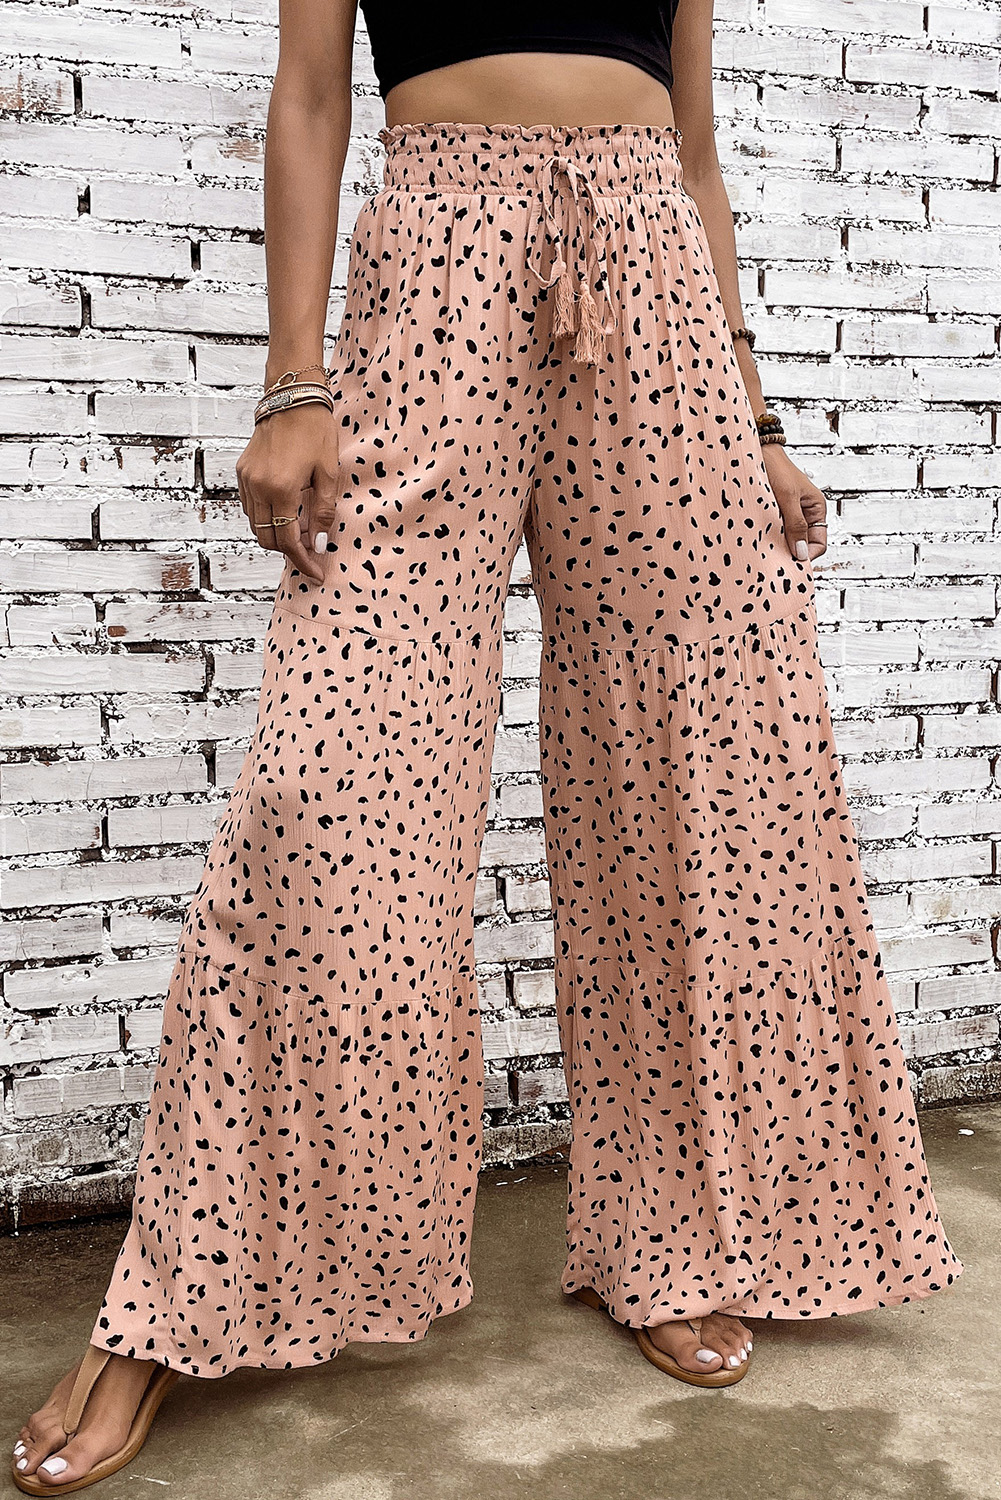 Shewin Wholesale Clothes Stores Brown Ruffle Wide Leg Animal Palazzo PANTS